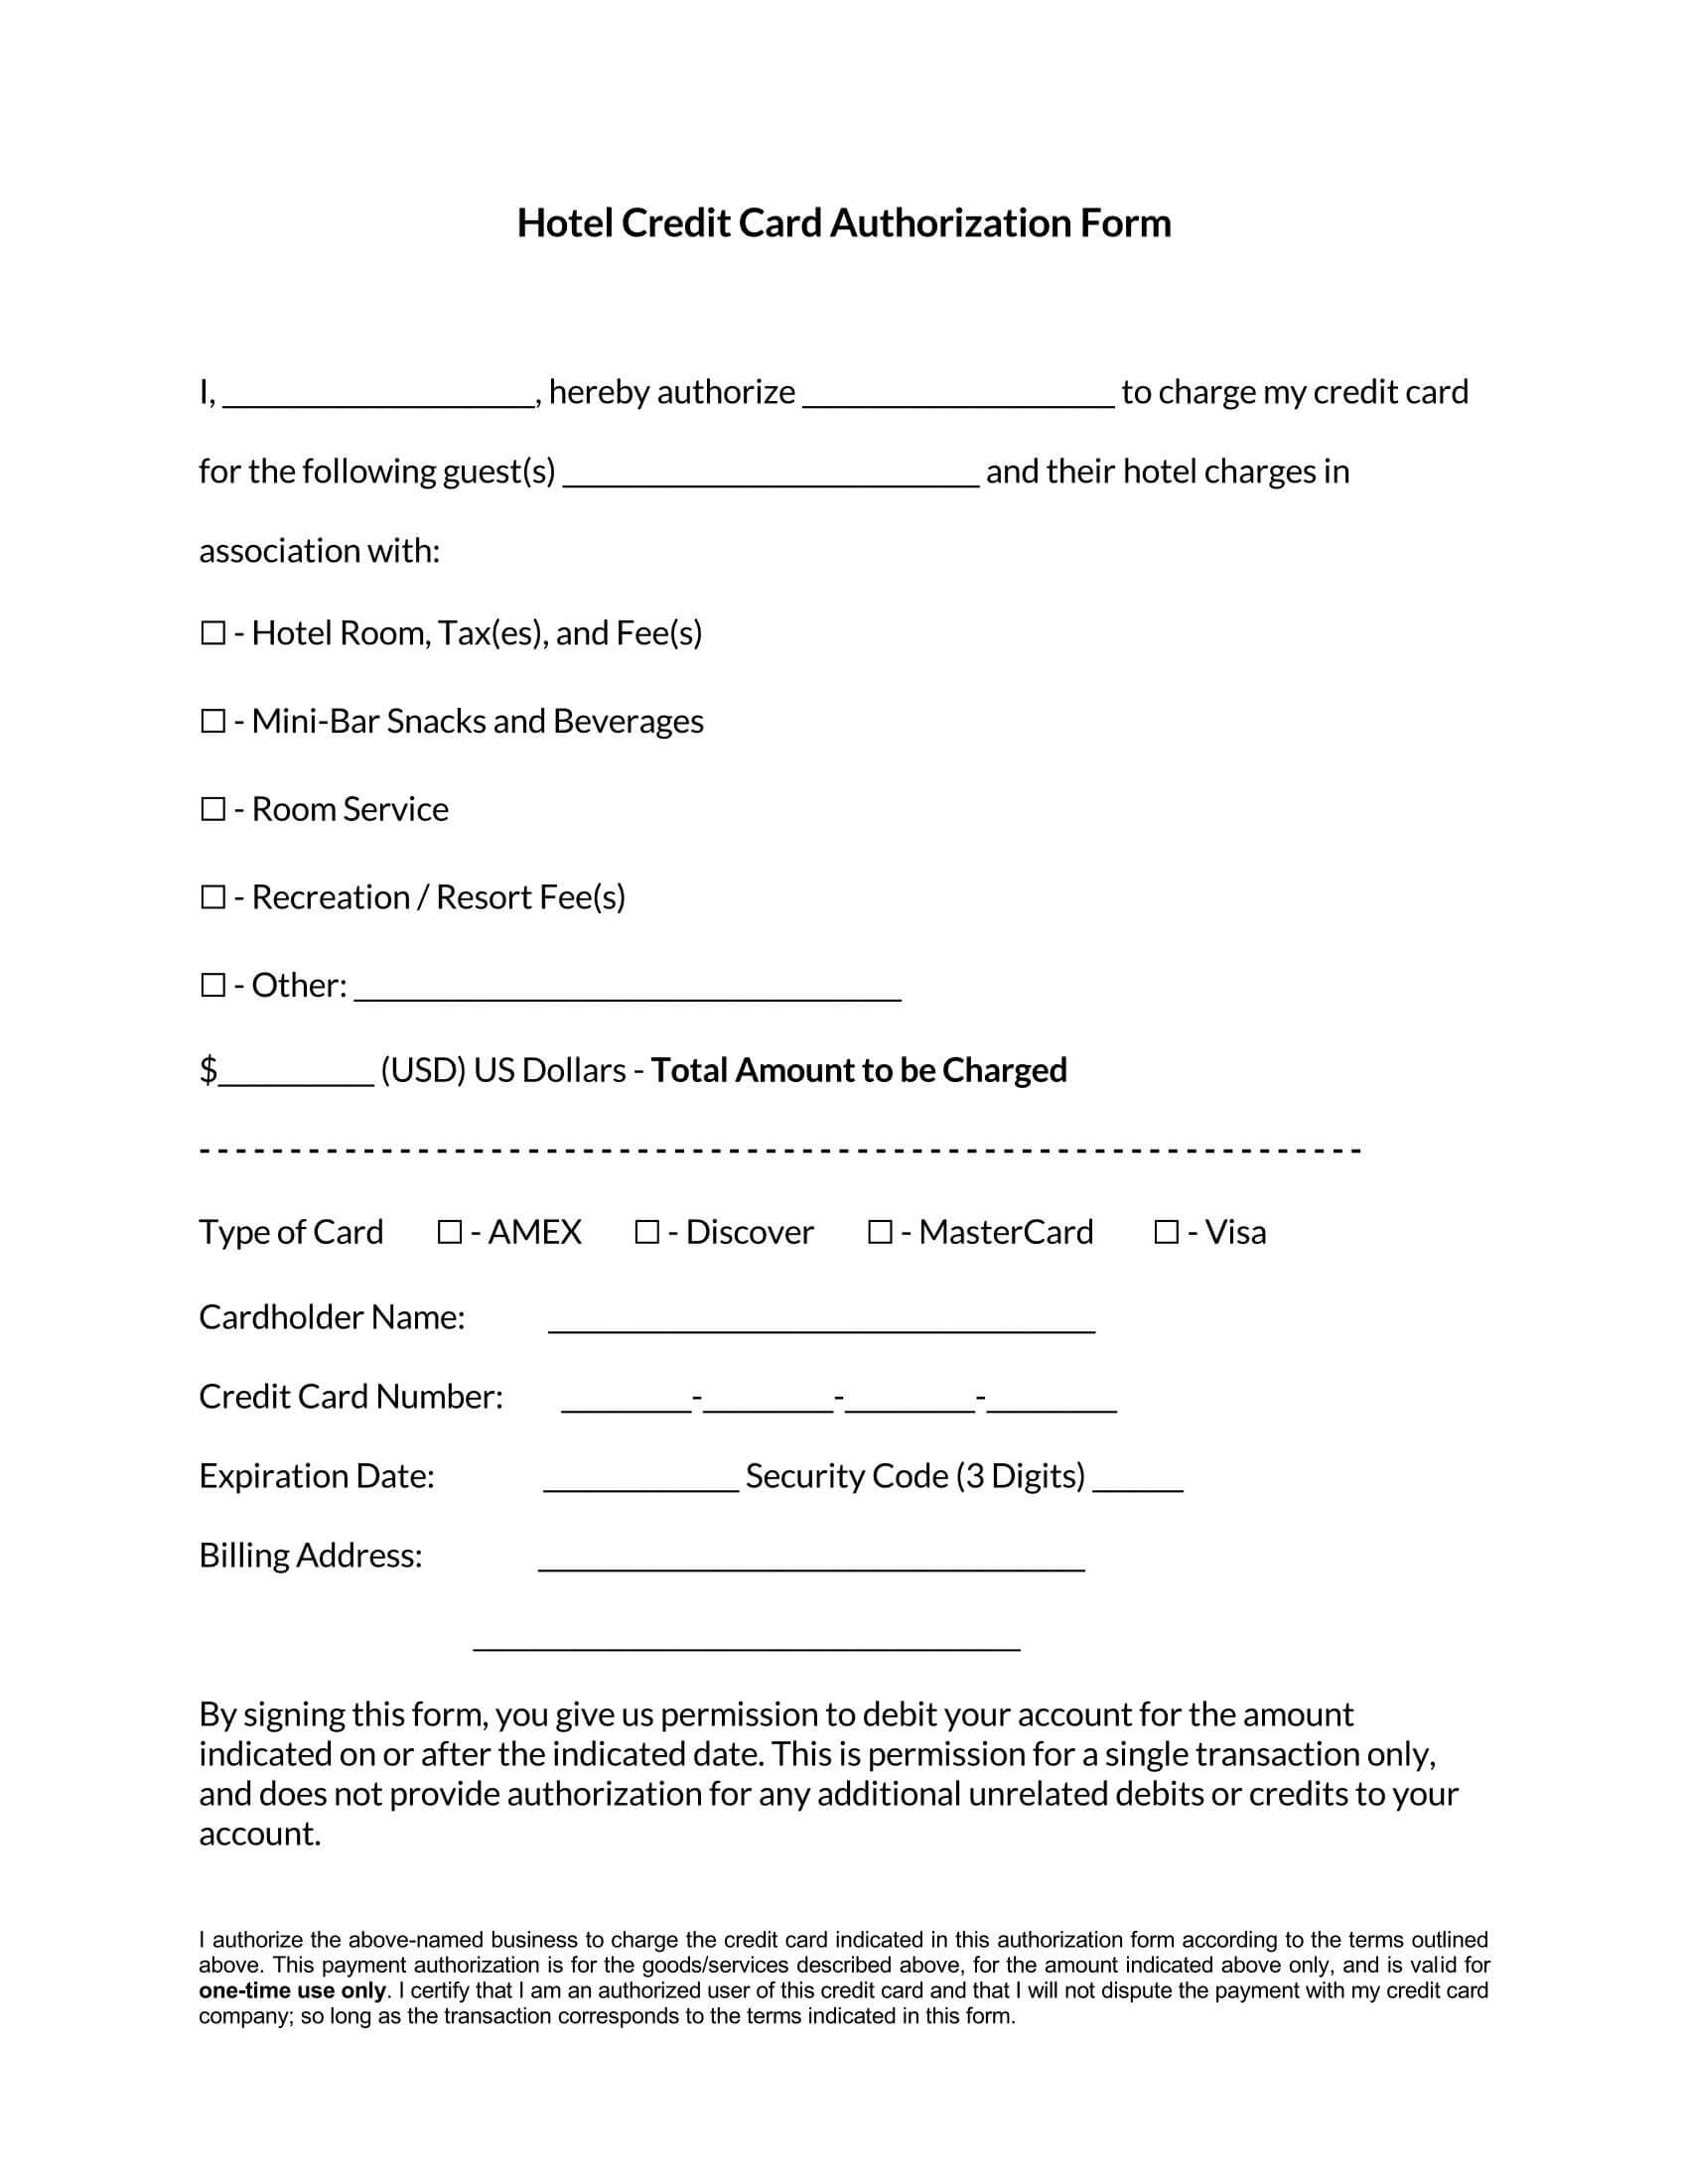 free-credit-card-authorization-form-templates-word-pdf